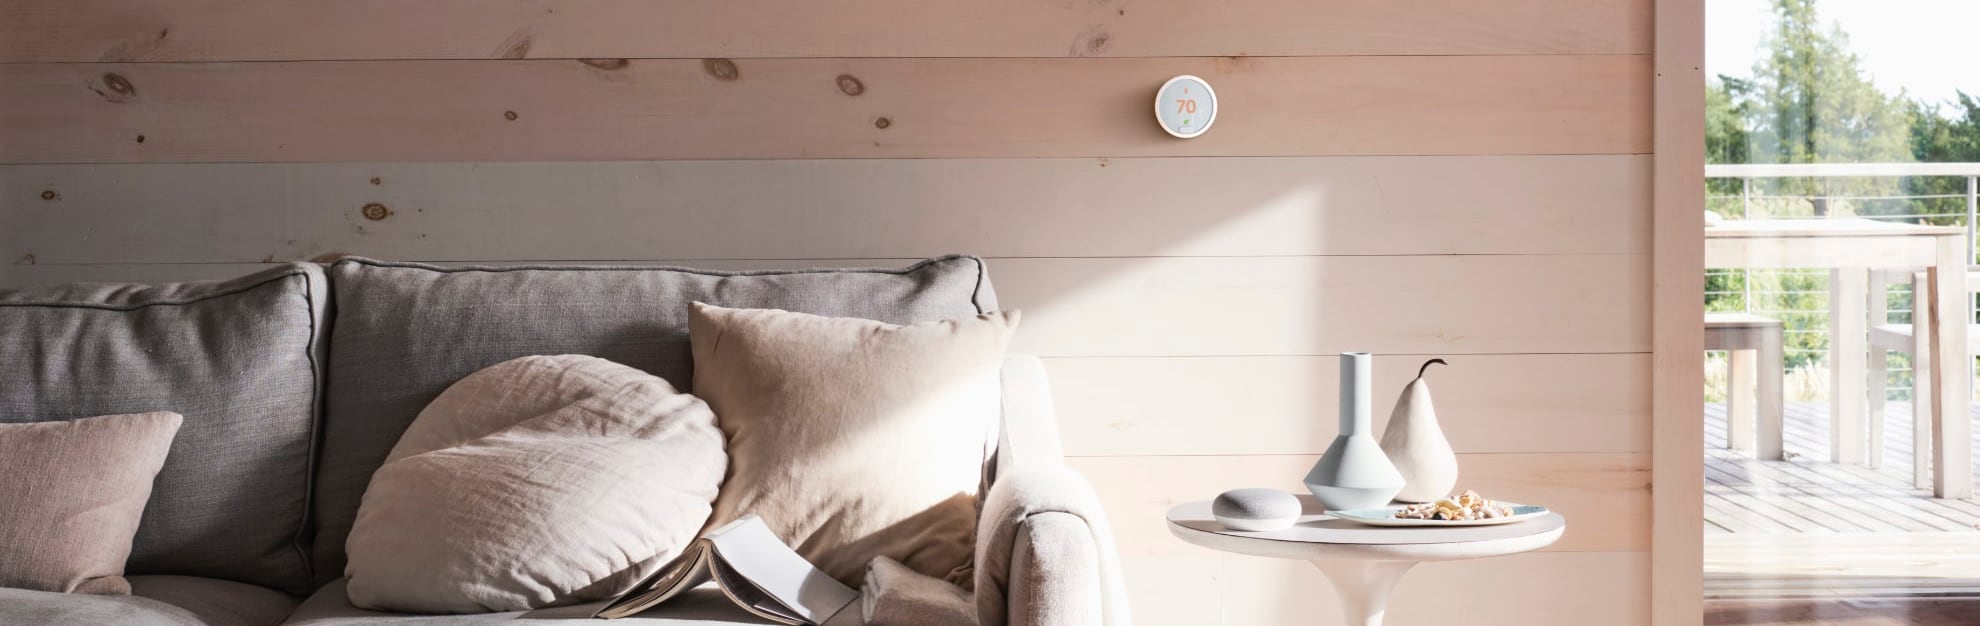 Vivint Home Automation in Tyler